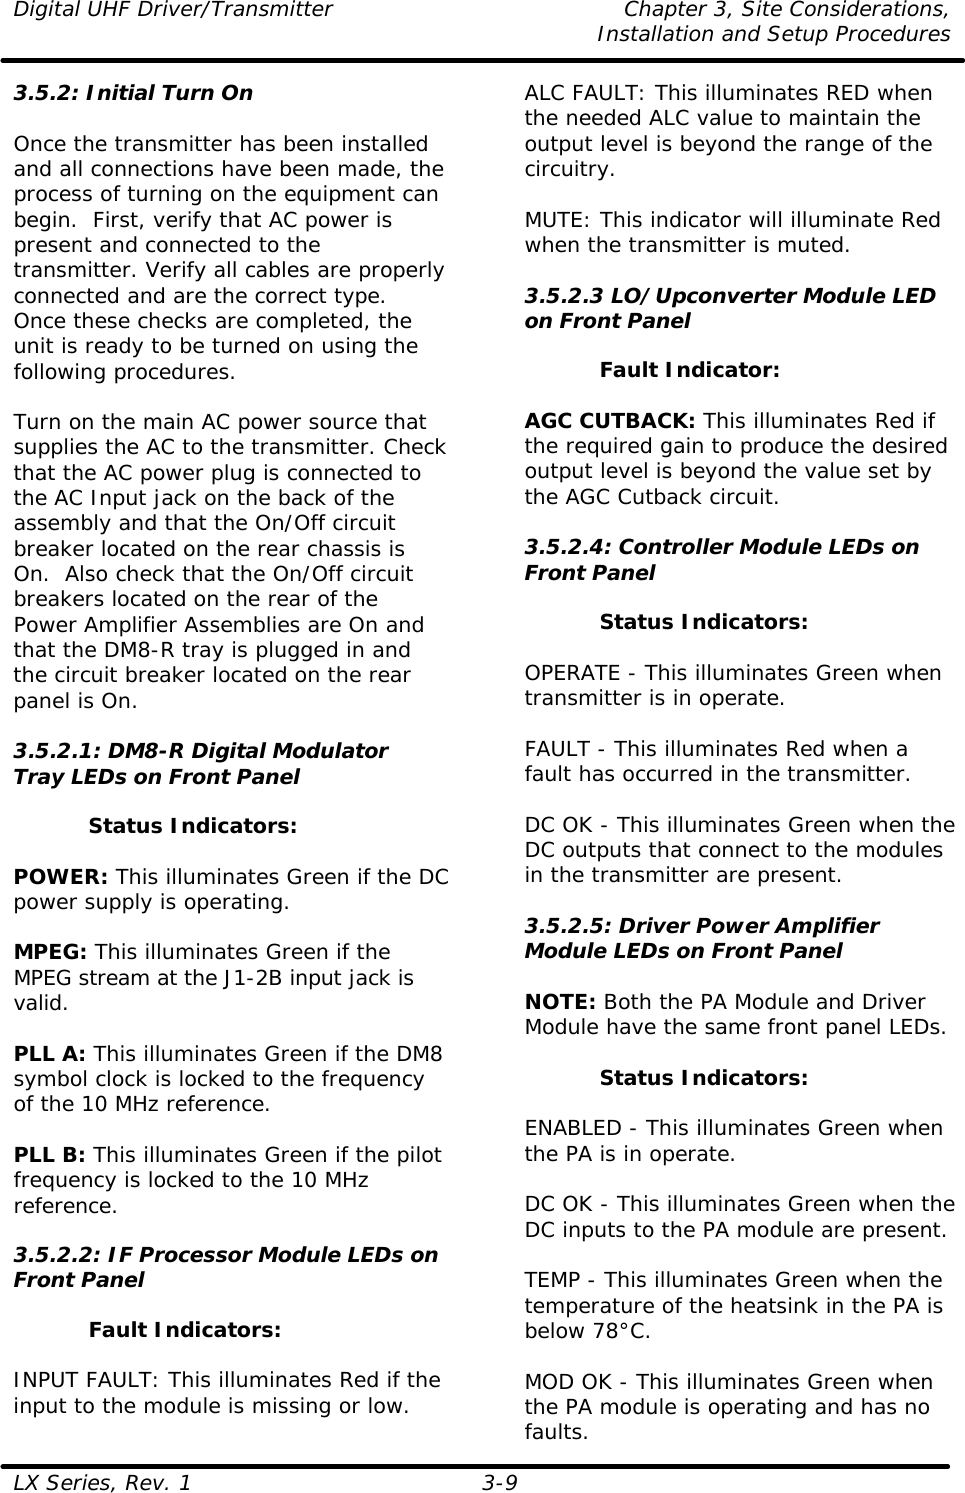 Digital UHF Driver/Transmitter Chapter 3, Site Considerations,   Installation and Setup Procedures  LX Series, Rev. 1 3-9 3.5.2: Initial Turn On  Once the transmitter has been installed and all connections have been made, the process of turning on the equipment can begin.  First, verify that AC power is present and connected to the transmitter. Verify all cables are properly connected and are the correct type.  Once these checks are completed, the unit is ready to be turned on using the following procedures.  Turn on the main AC power source that supplies the AC to the transmitter. Check that the AC power plug is connected to the AC Input jack on the back of the assembly and that the On/Off circuit breaker located on the rear chassis is On.  Also check that the On/Off circuit breakers located on the rear of the Power Amplifier Assemblies are On and that the DM8-R tray is plugged in and the circuit breaker located on the rear panel is On.  3.5.2.1: DM8-R Digital Modulator Tray LEDs on Front Panel  Status Indicators:  POWER: This illuminates Green if the DC power supply is operating.  MPEG: This illuminates Green if the MPEG stream at the J1-2B input jack is valid.  PLL A: This illuminates Green if the DM8 symbol clock is locked to the frequency of the 10 MHz reference.  PLL B: This illuminates Green if the pilot frequency is locked to the 10 MHz reference.  3.5.2.2: IF Processor Module LEDs on Front Panel  Fault Indicators:  INPUT FAULT: This illuminates Red if the input to the module is missing or low.  ALC FAULT: This illuminates RED when the needed ALC value to maintain the output level is beyond the range of the circuitry.  MUTE: This indicator will illuminate Red when the transmitter is muted.  3.5.2.3 LO/Upconverter Module LED on Front Panel  Fault Indicator:  AGC CUTBACK: This illuminates Red if the required gain to produce the desired output level is beyond the value set by the AGC Cutback circuit.  3.5.2.4: Controller Module LEDs on Front Panel  Status Indicators:  OPERATE - This illuminates Green when transmitter is in operate.  FAULT - This illuminates Red when a fault has occurred in the transmitter.  DC OK - This illuminates Green when the DC outputs that connect to the modules in the transmitter are present.  3.5.2.5: Driver Power Amplifier Module LEDs on Front Panel  NOTE: Both the PA Module and Driver Module have the same front panel LEDs.  Status Indicators:  ENABLED - This illuminates Green when the PA is in operate.  DC OK - This illuminates Green when the DC inputs to the PA module are present.  TEMP - This illuminates Green when the temperature of the heatsink in the PA is below 78°C.  MOD OK - This illuminates Green when the PA module is operating and has no faults. 